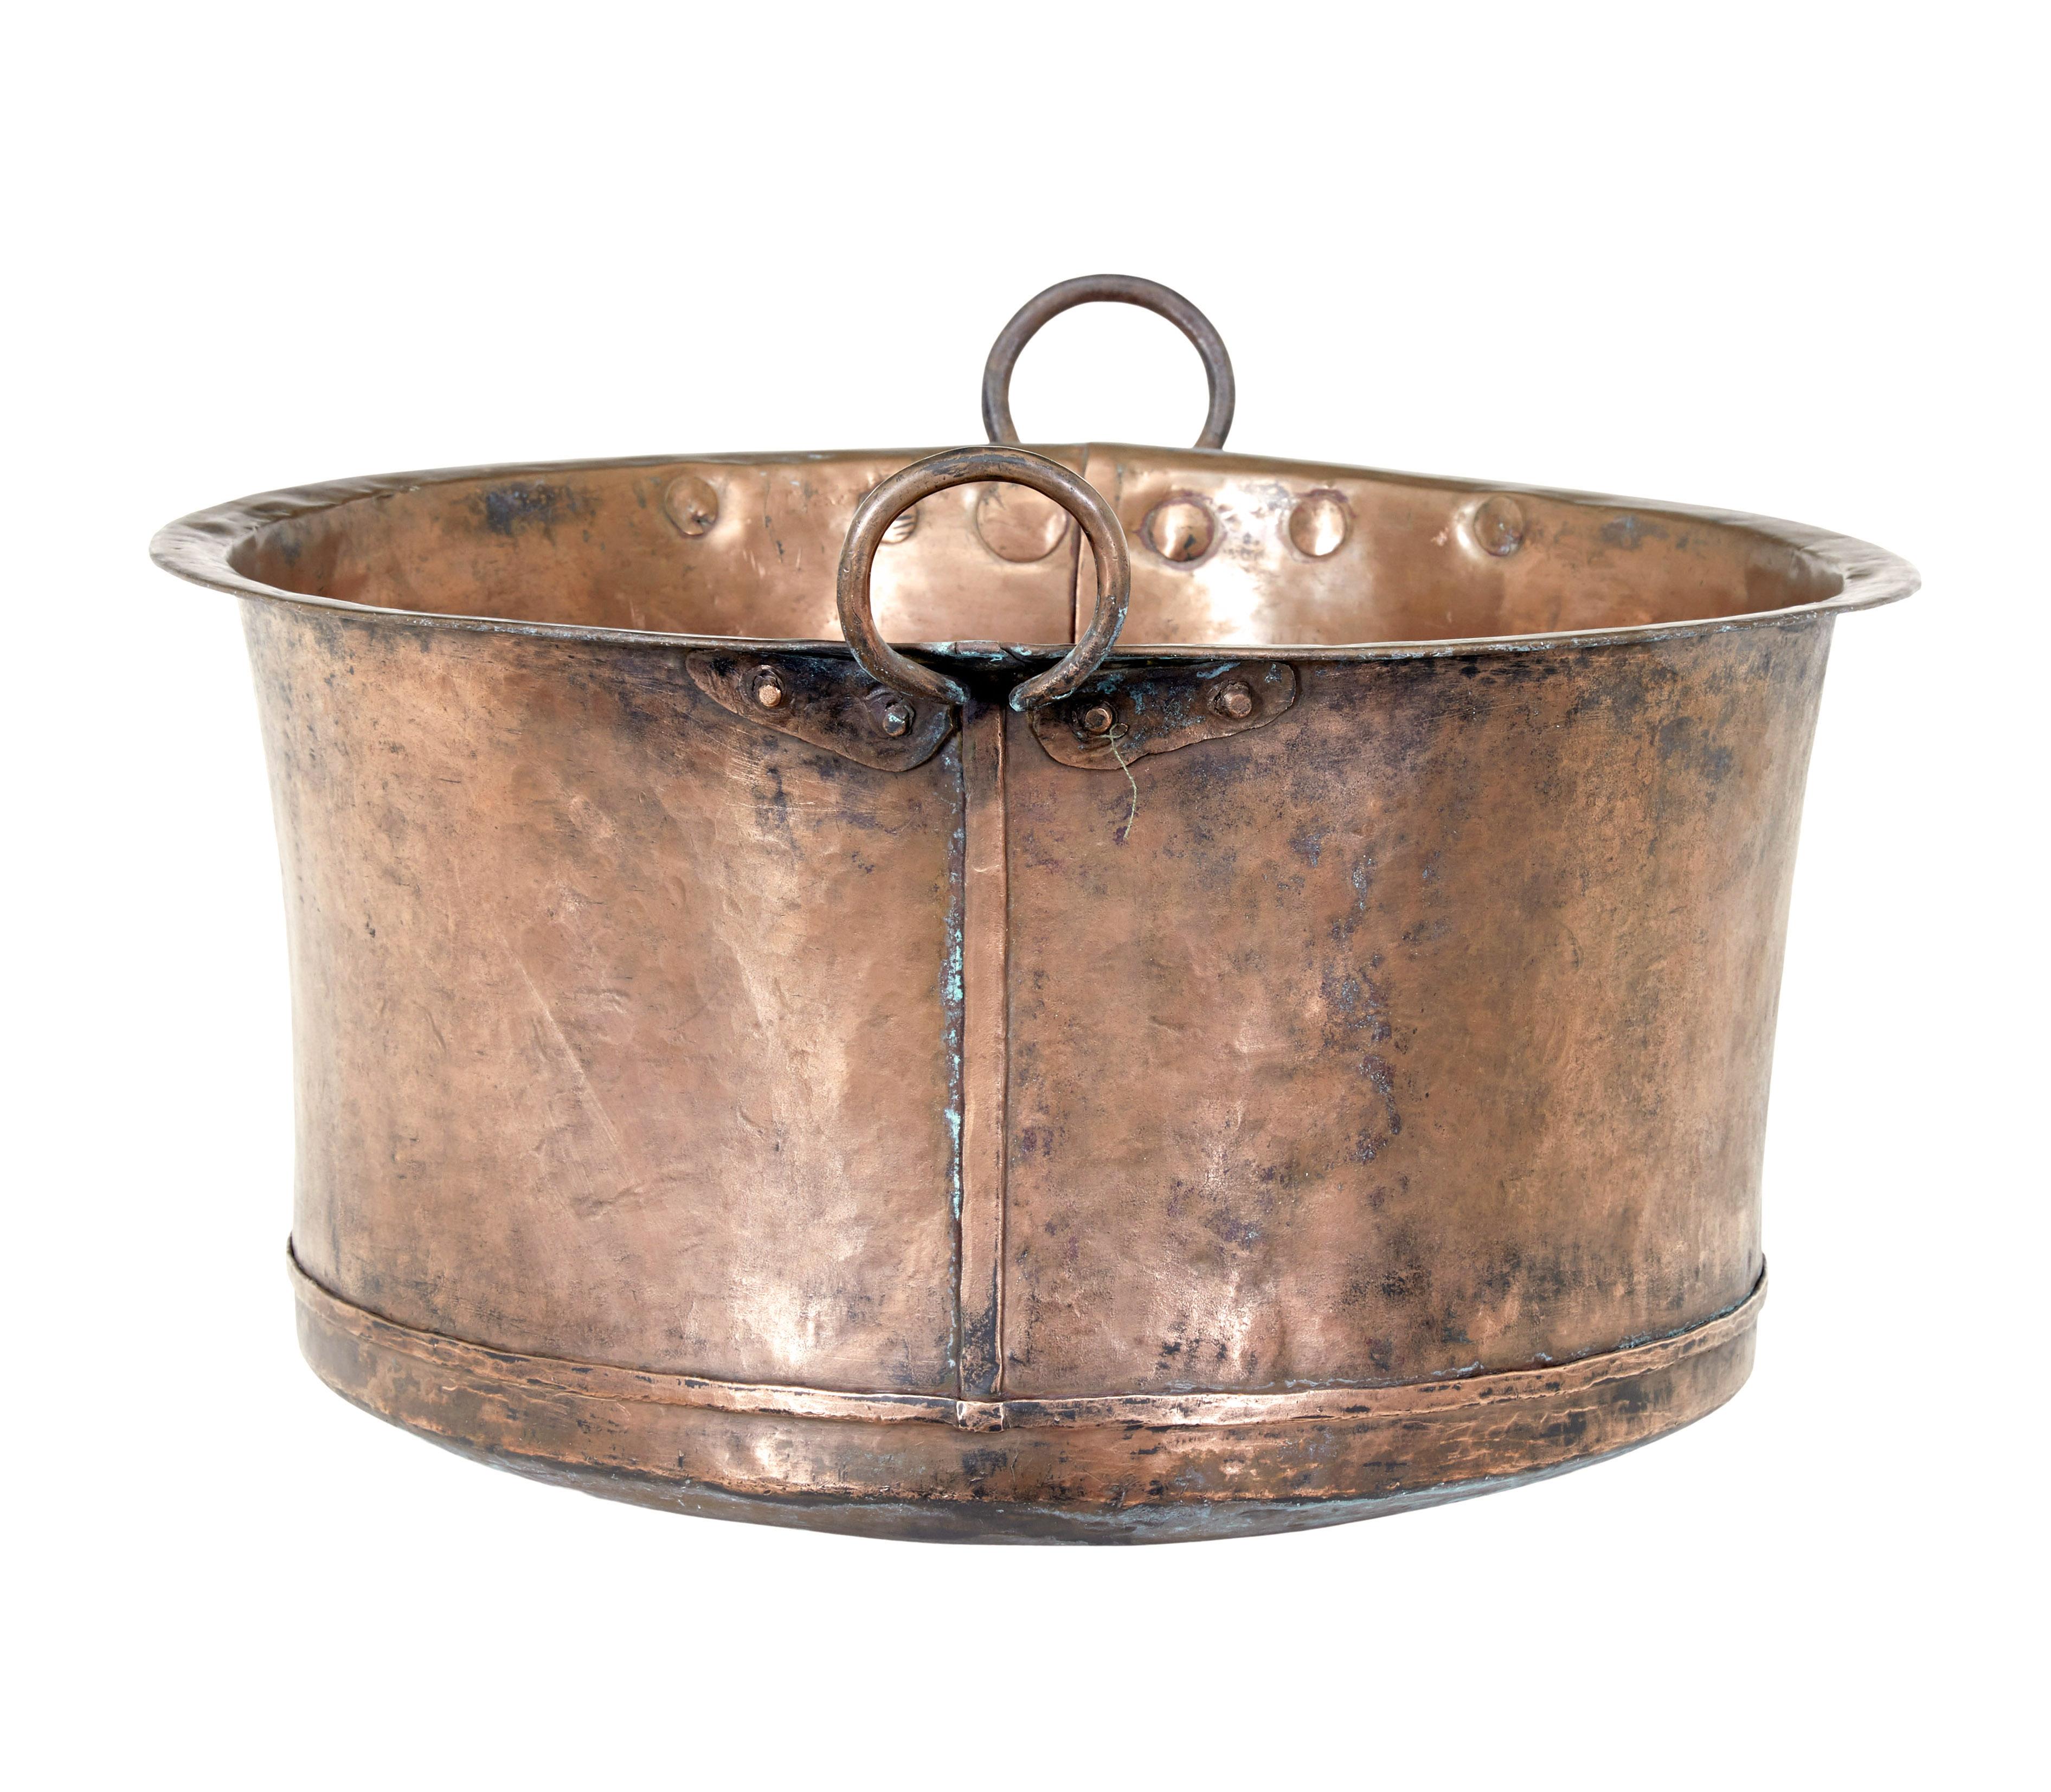 Victorian Large 19th century copper cooking vessel For Sale